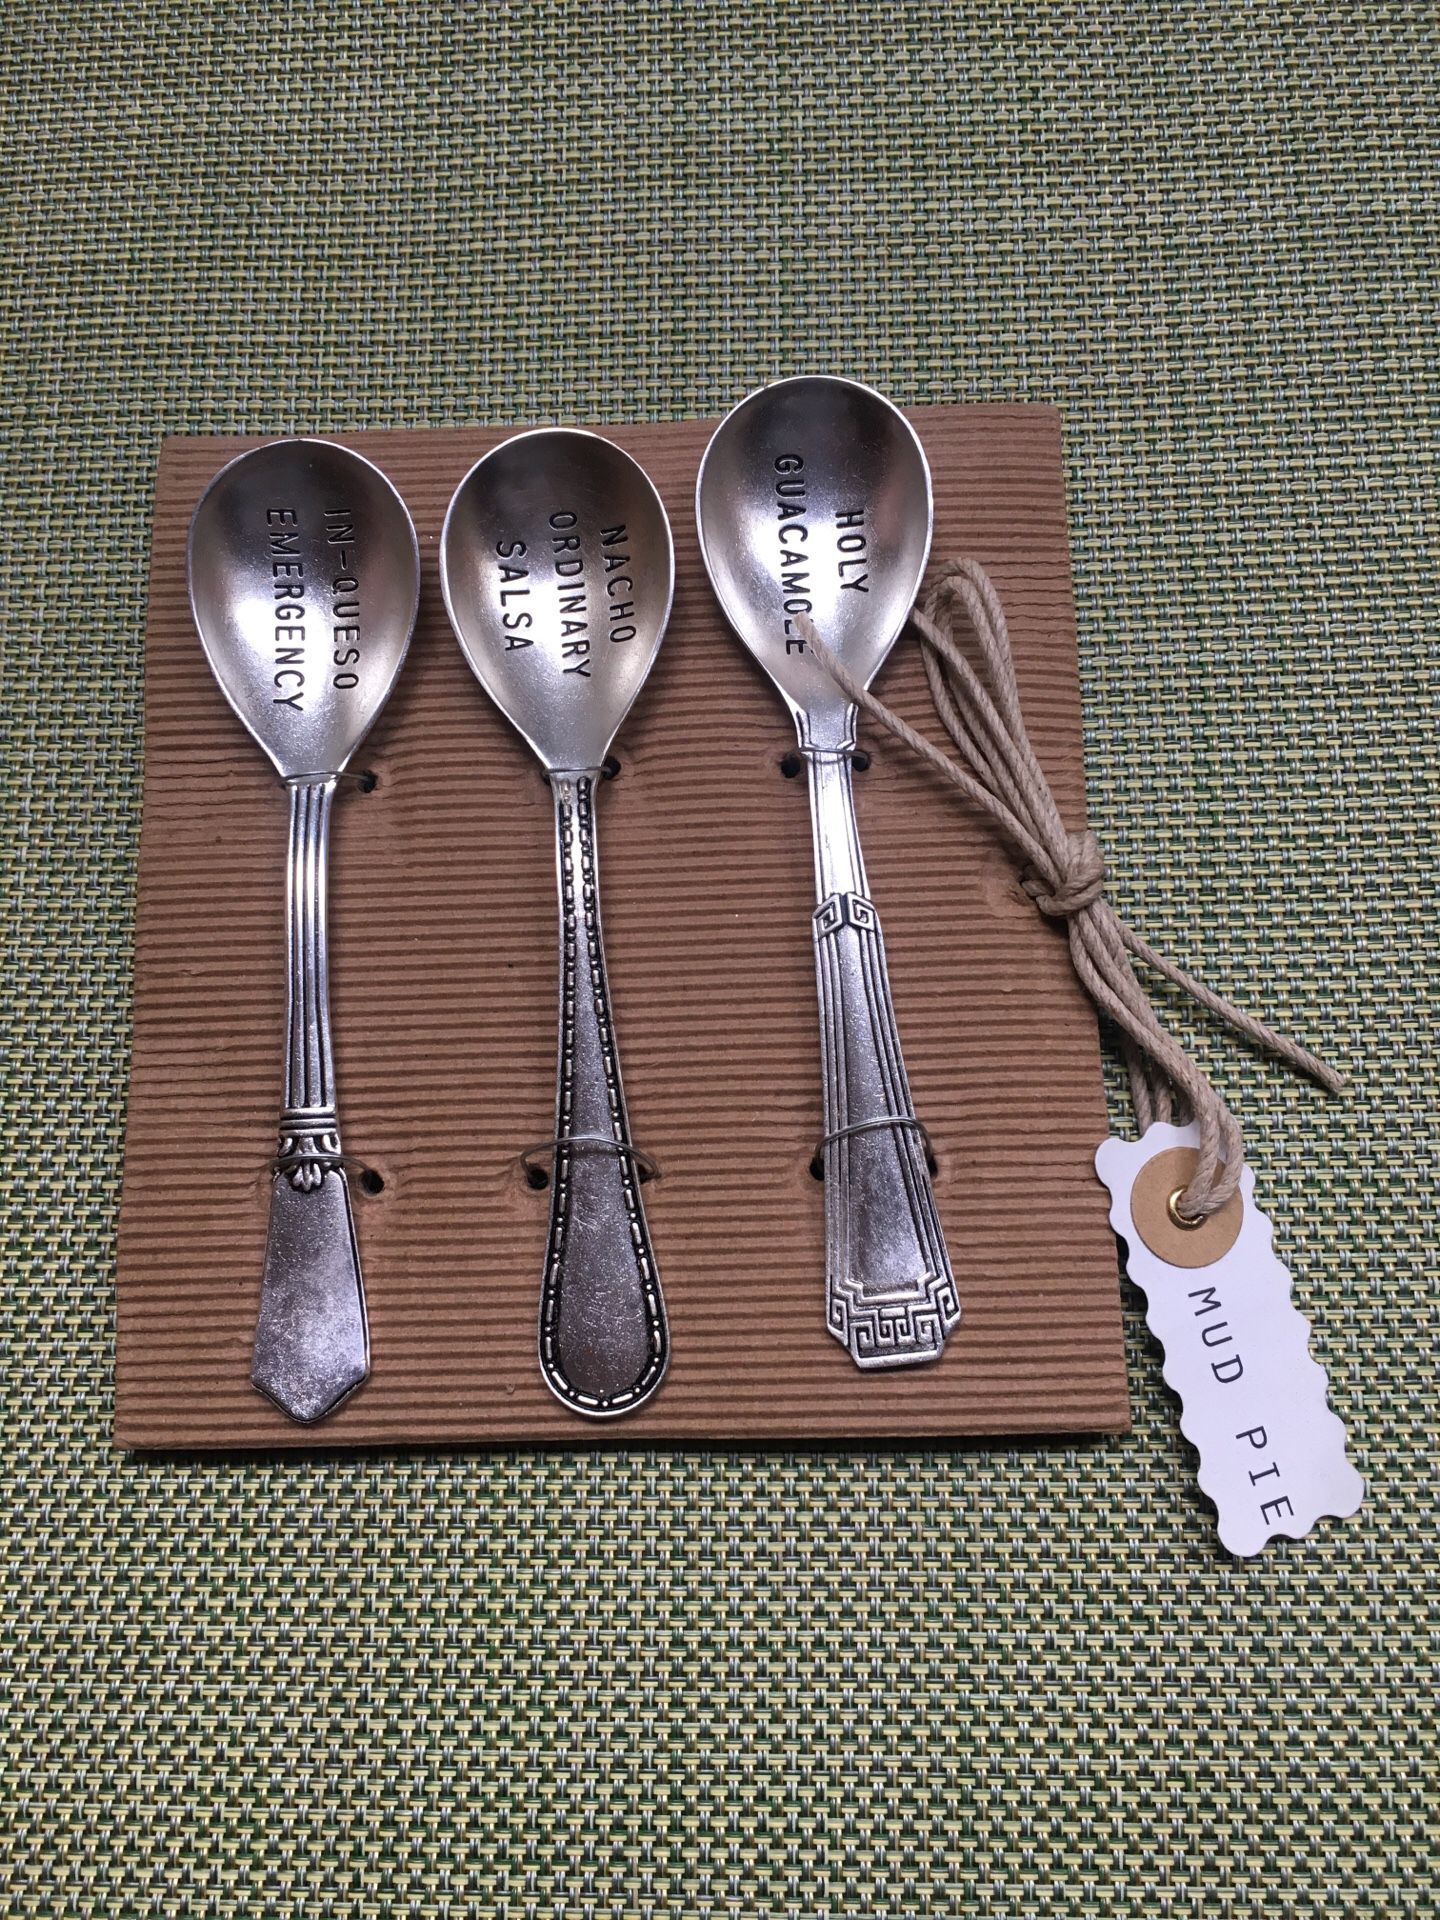 A set of cute and whimsical spoons.